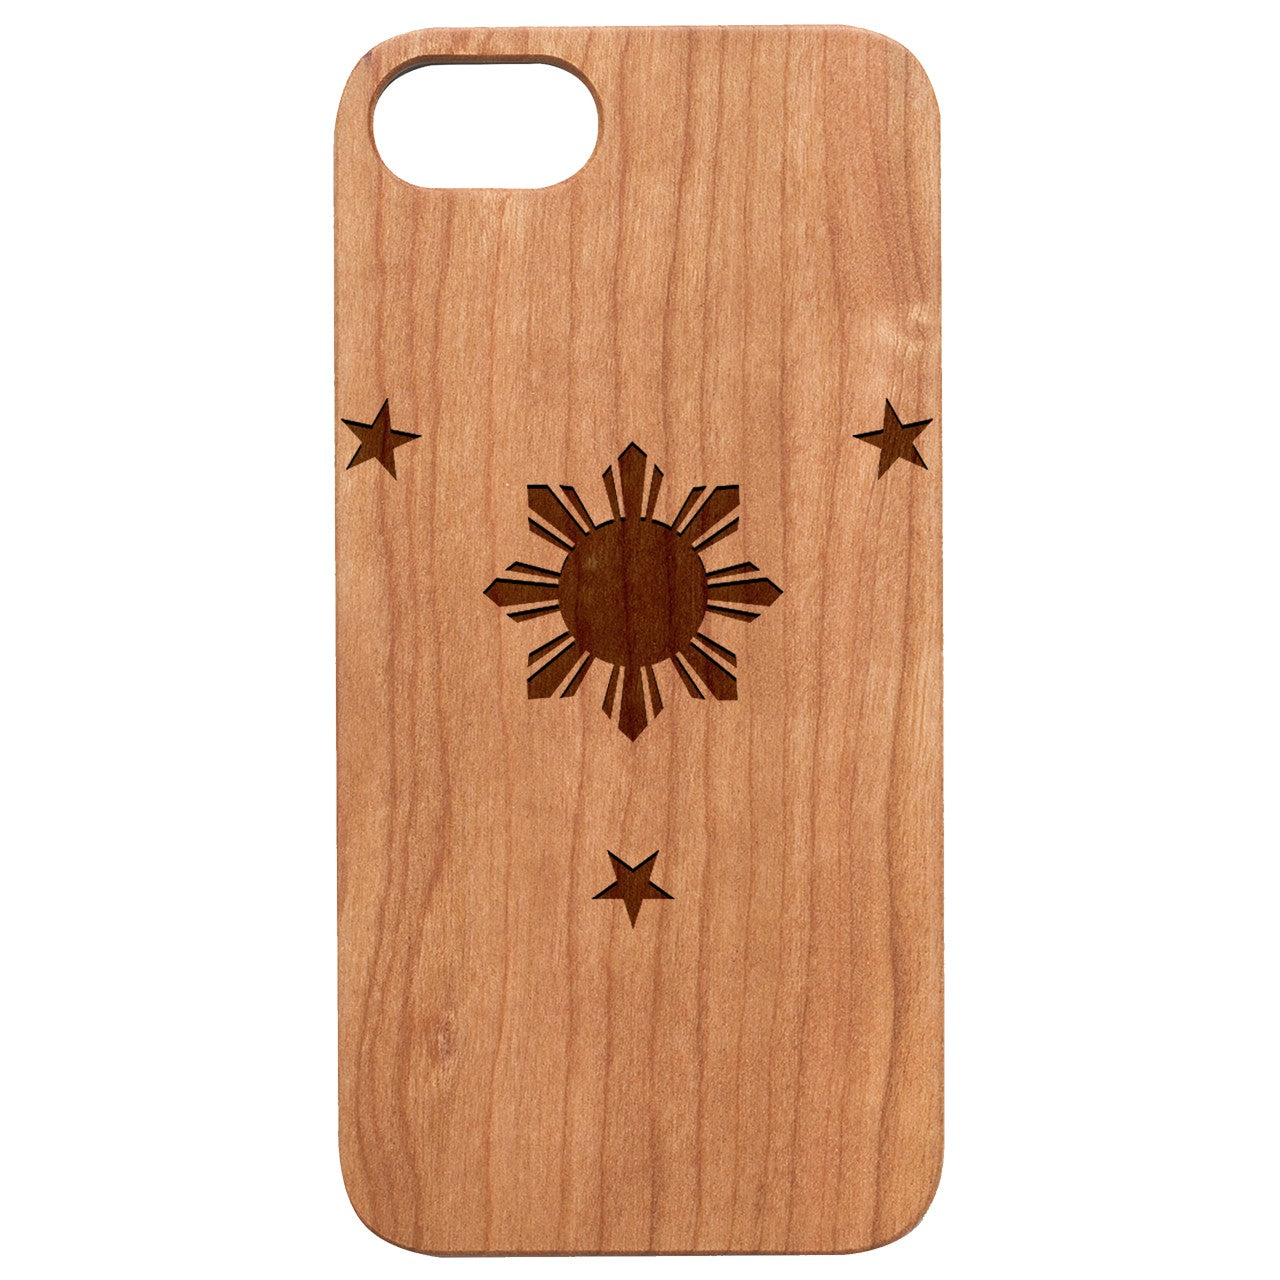  Phillipines Stars - Engraved - Wooden Phone Case - IPhone 13 Models